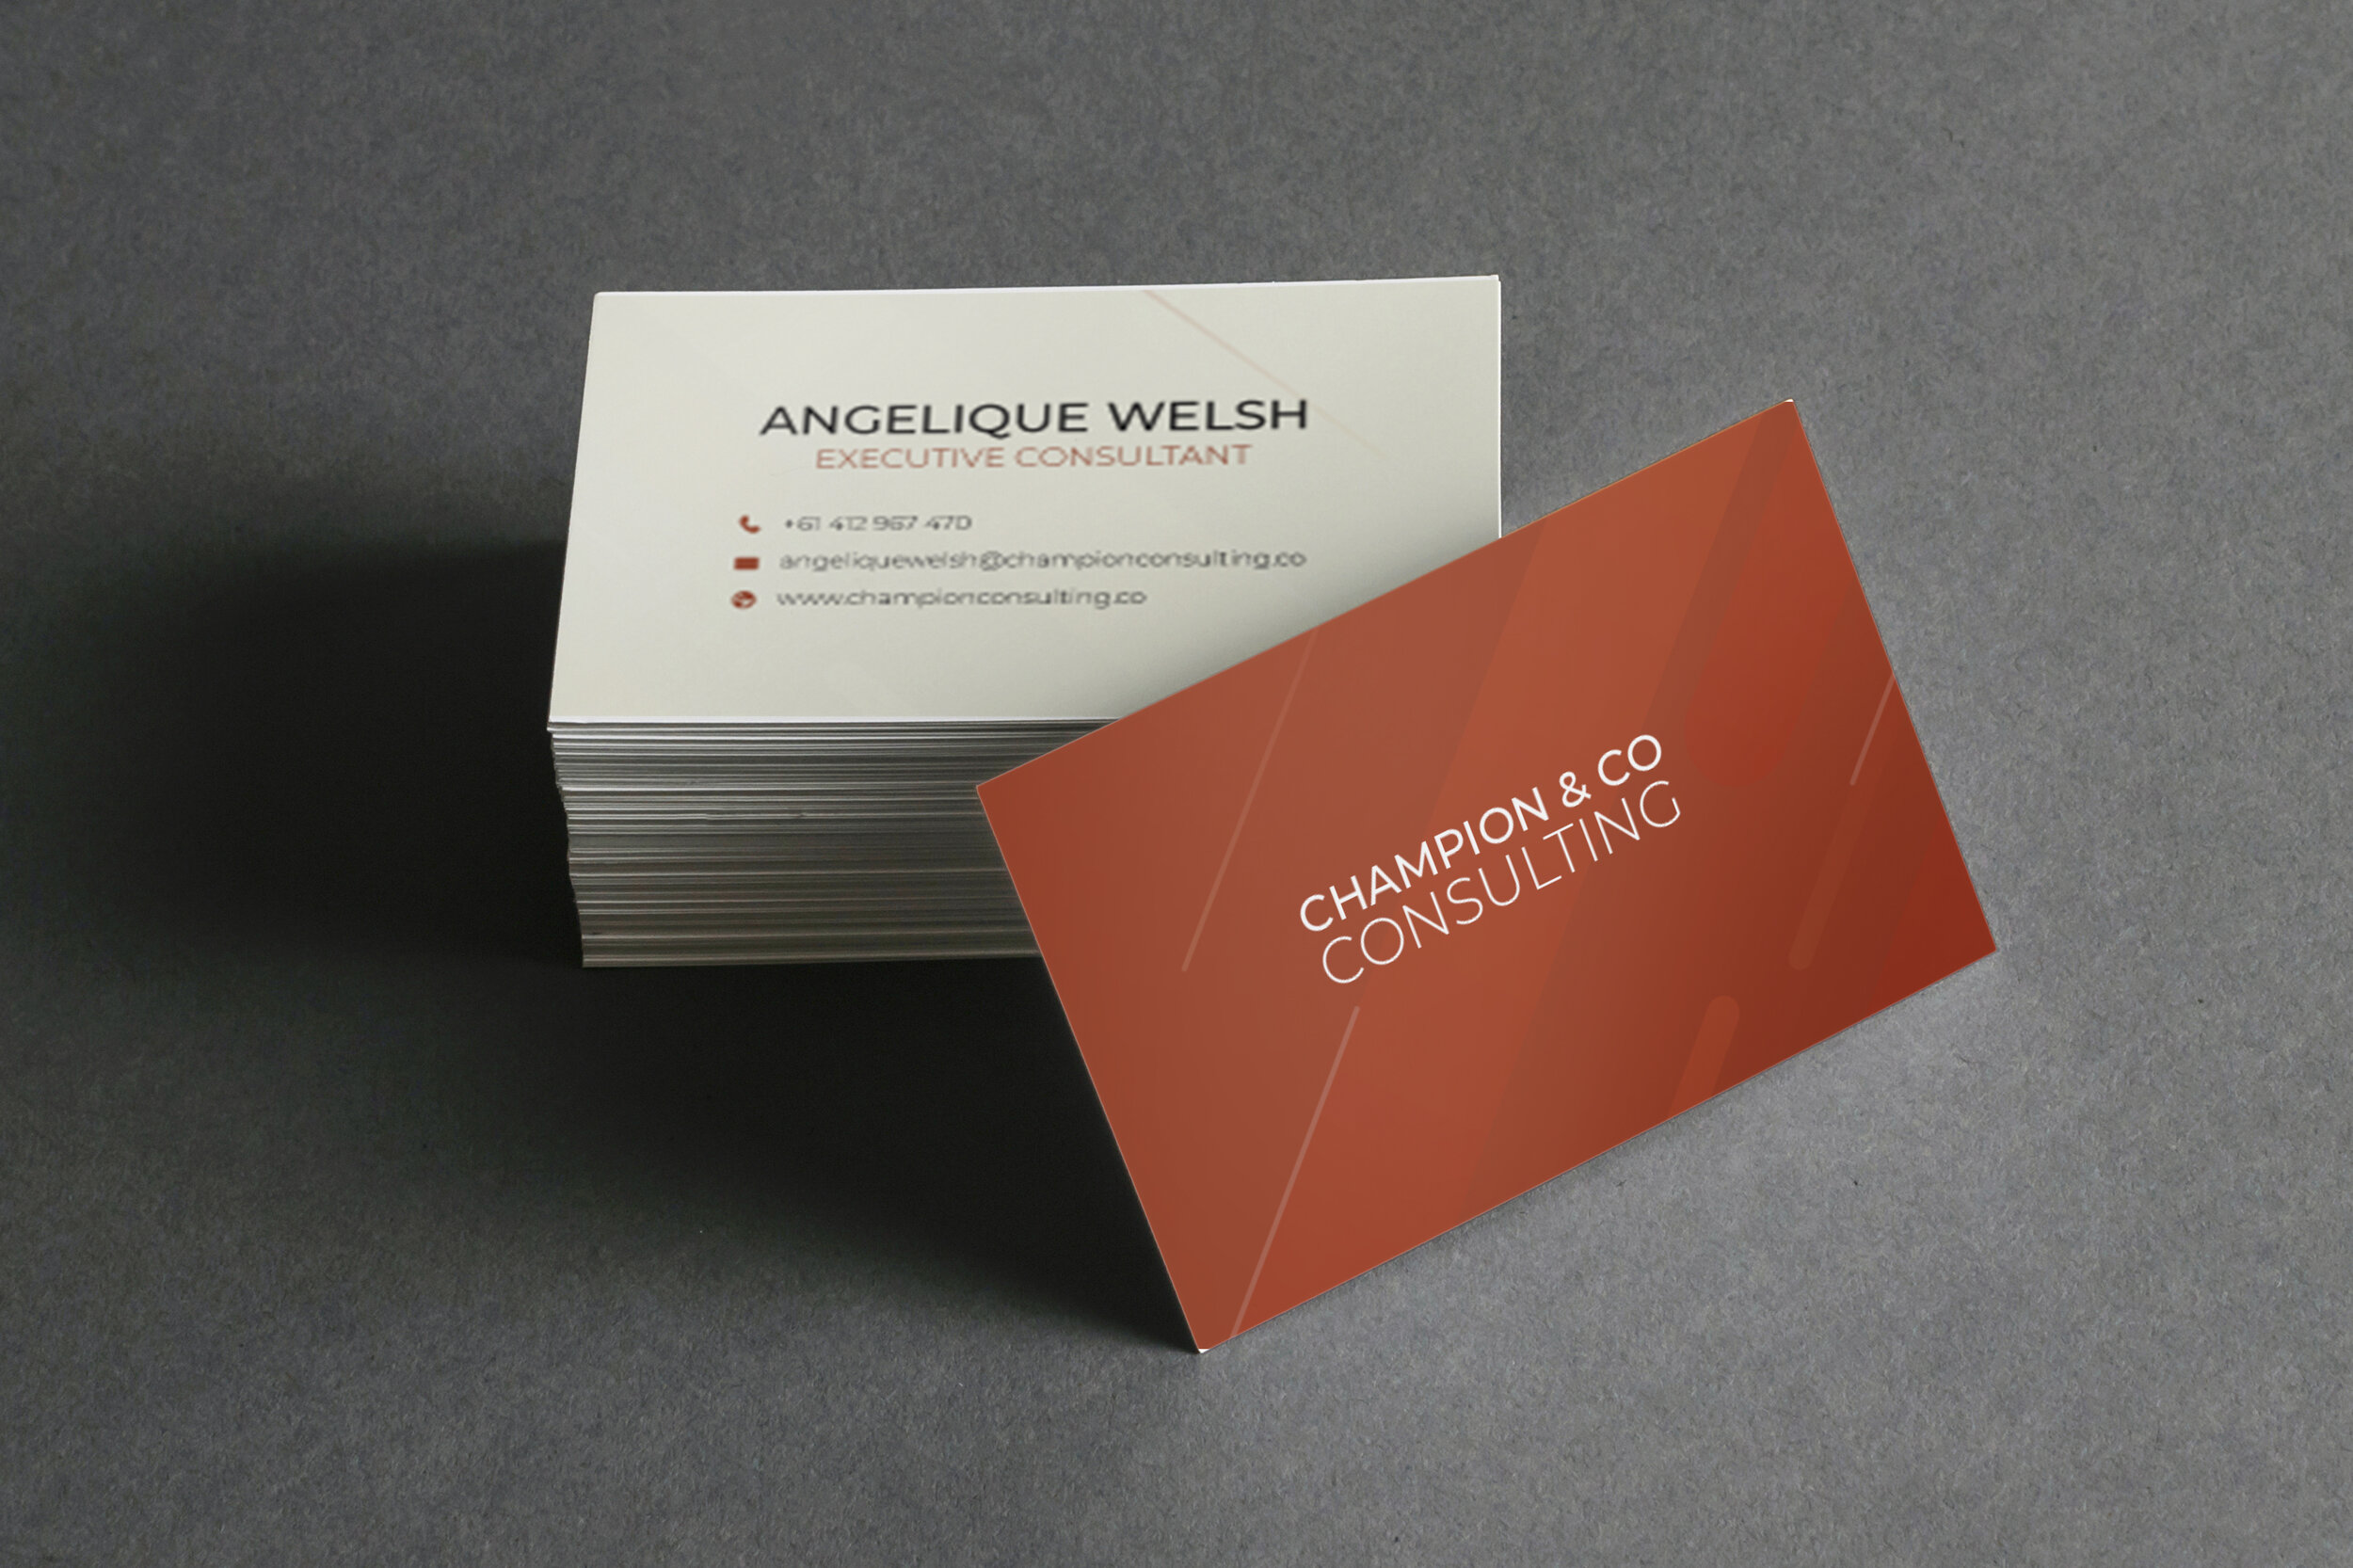 Champion & Co Consulting Business Card 3.jpg